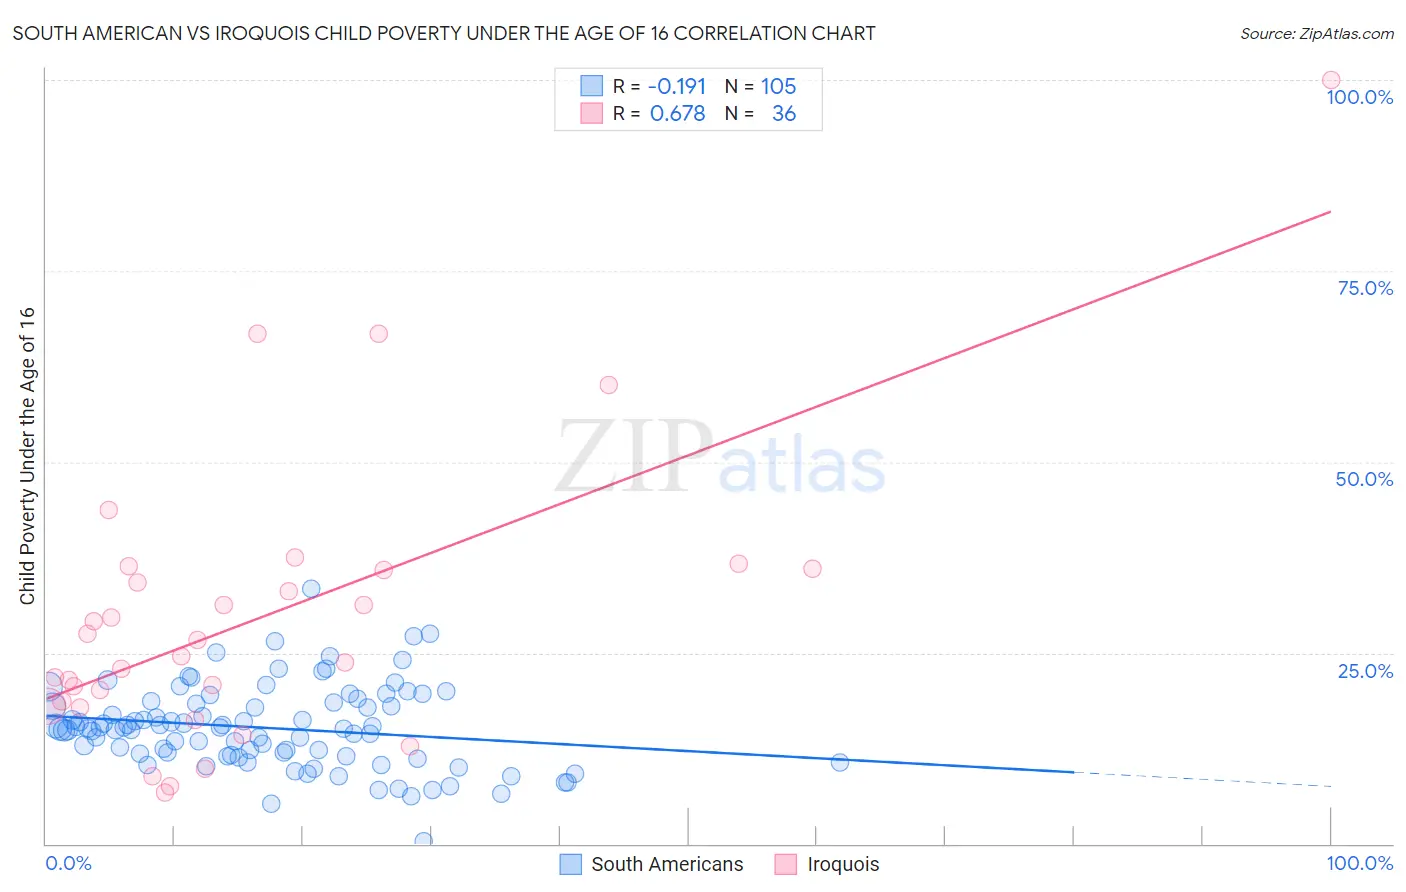 South American vs Iroquois Child Poverty Under the Age of 16